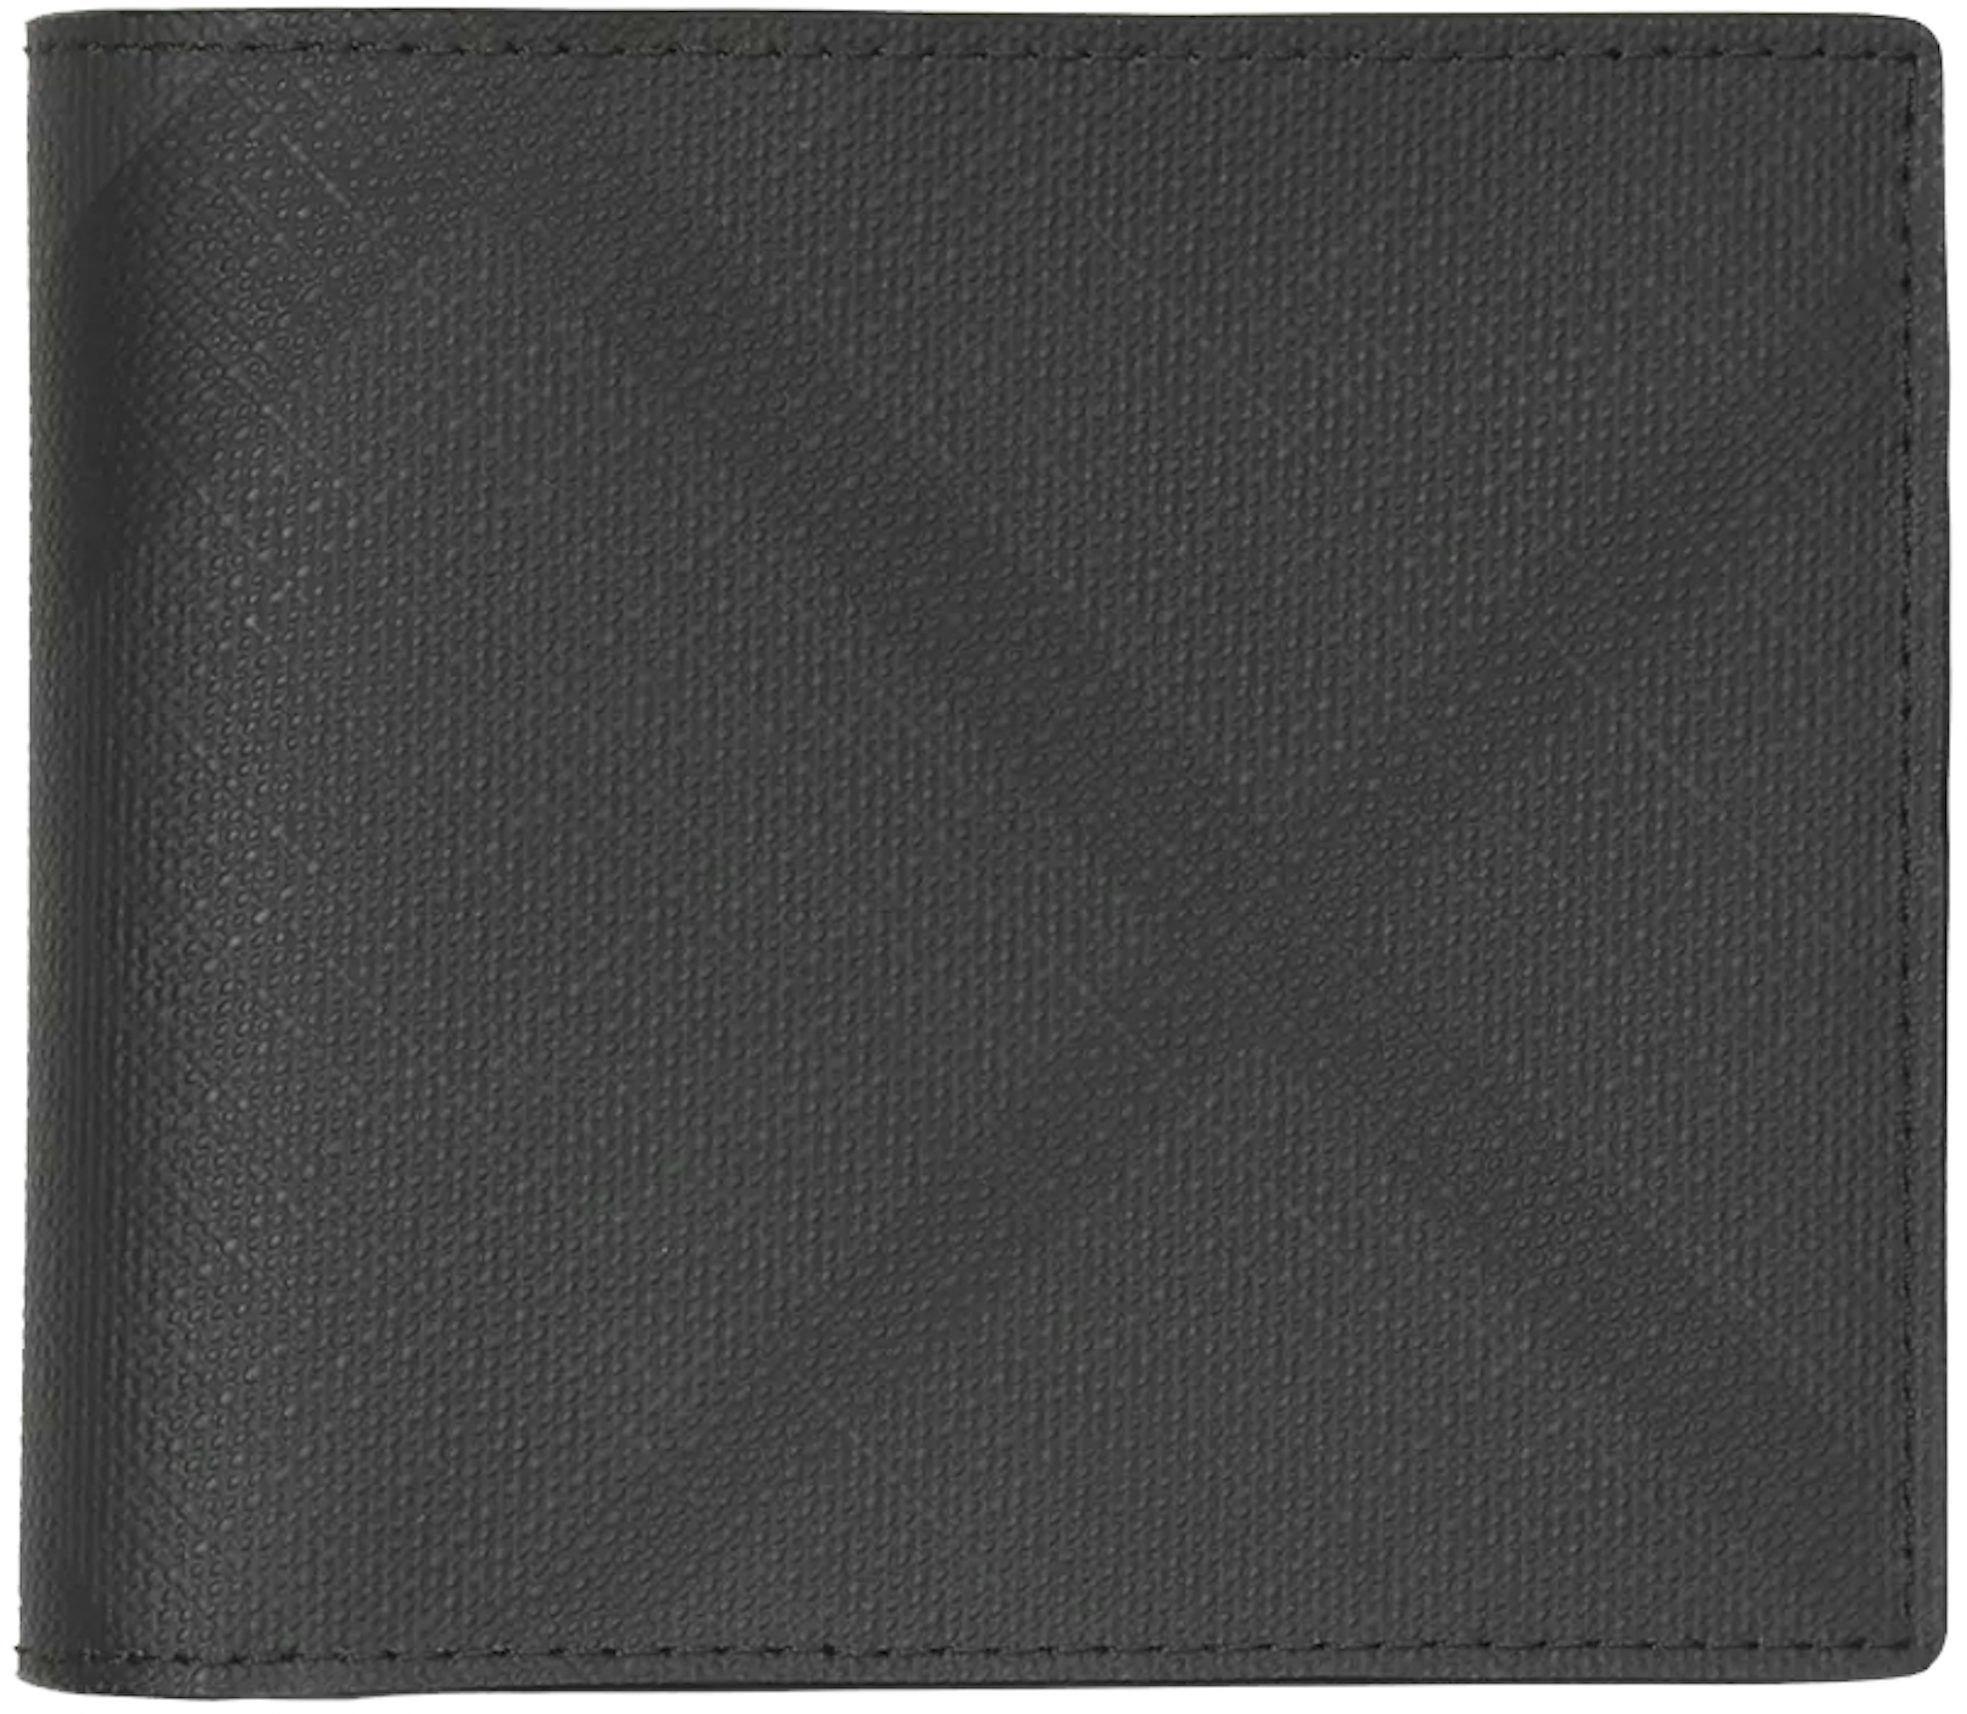 Burberry Vintage Check Bifold Wallet (8 Card Slot) Storm Grey Check in  Leather - US